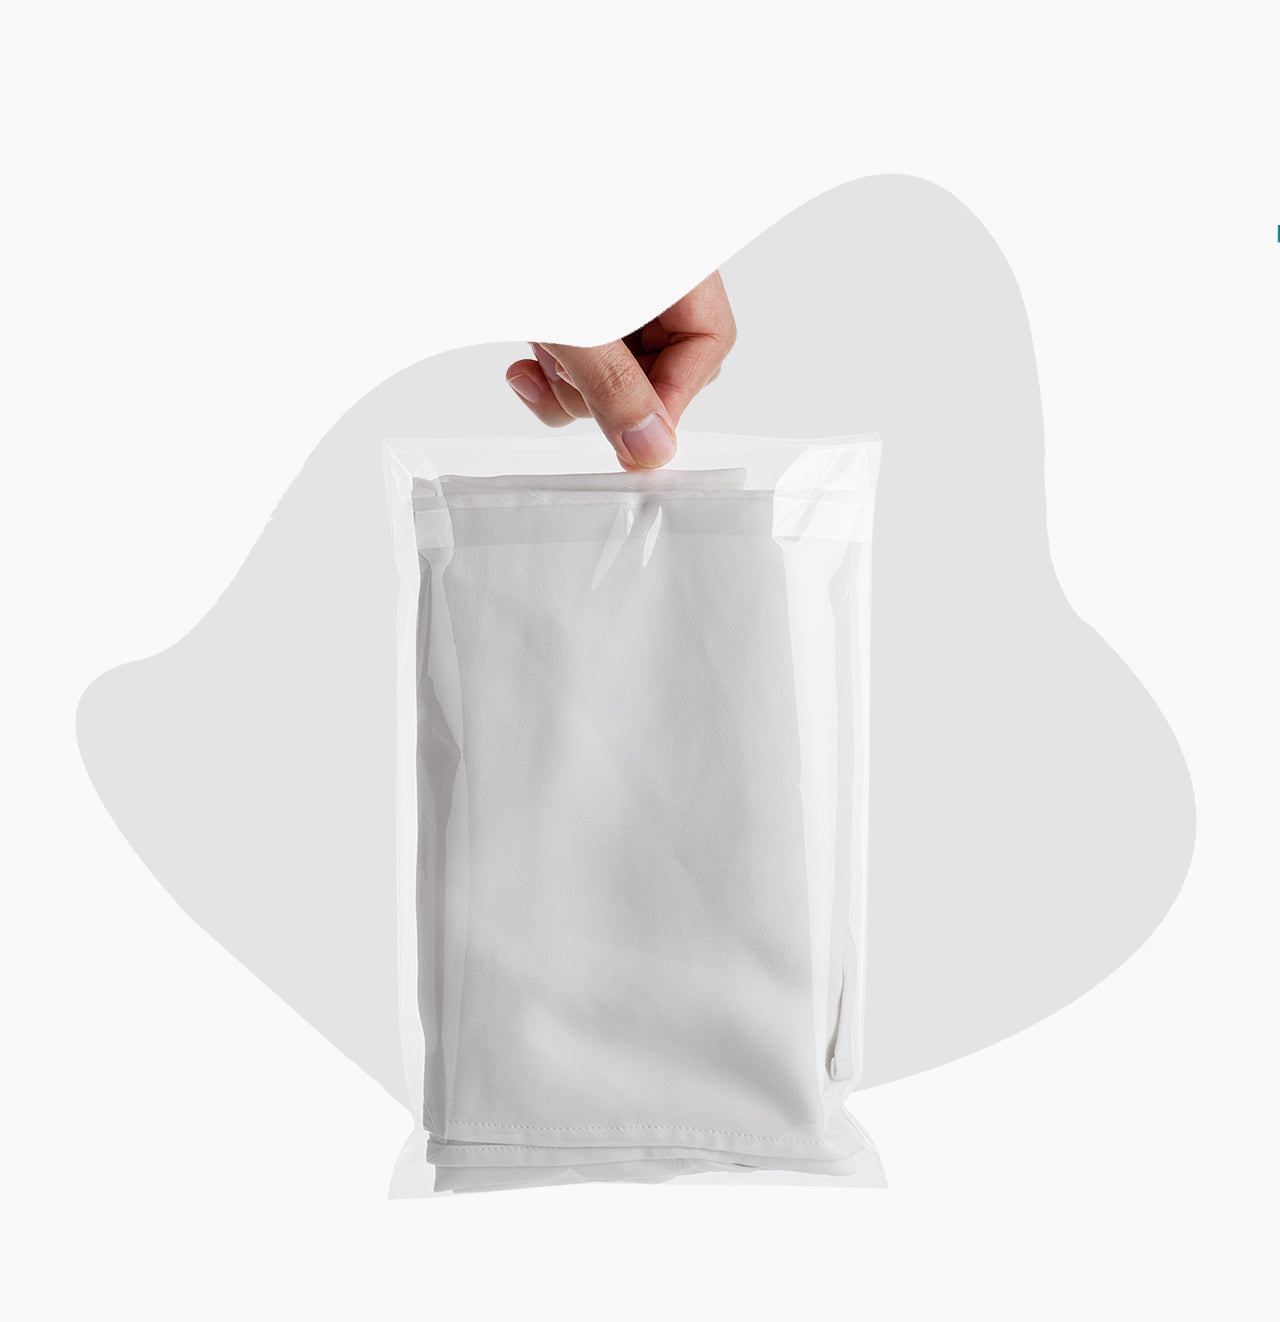 Buy 25 CLEAR TRANSPARENT PLASTIC SELF SEAL PACKAGING MAILING BAGS LARGE  SIZE 12x16 305 x 405mm 60mu PEEL & SEAL SEE THROUGH CELLOPHANE POLYTHENE  POSTAL PACKING POSTAGE MAIL SACKS ENVELOPES MAILERS Online